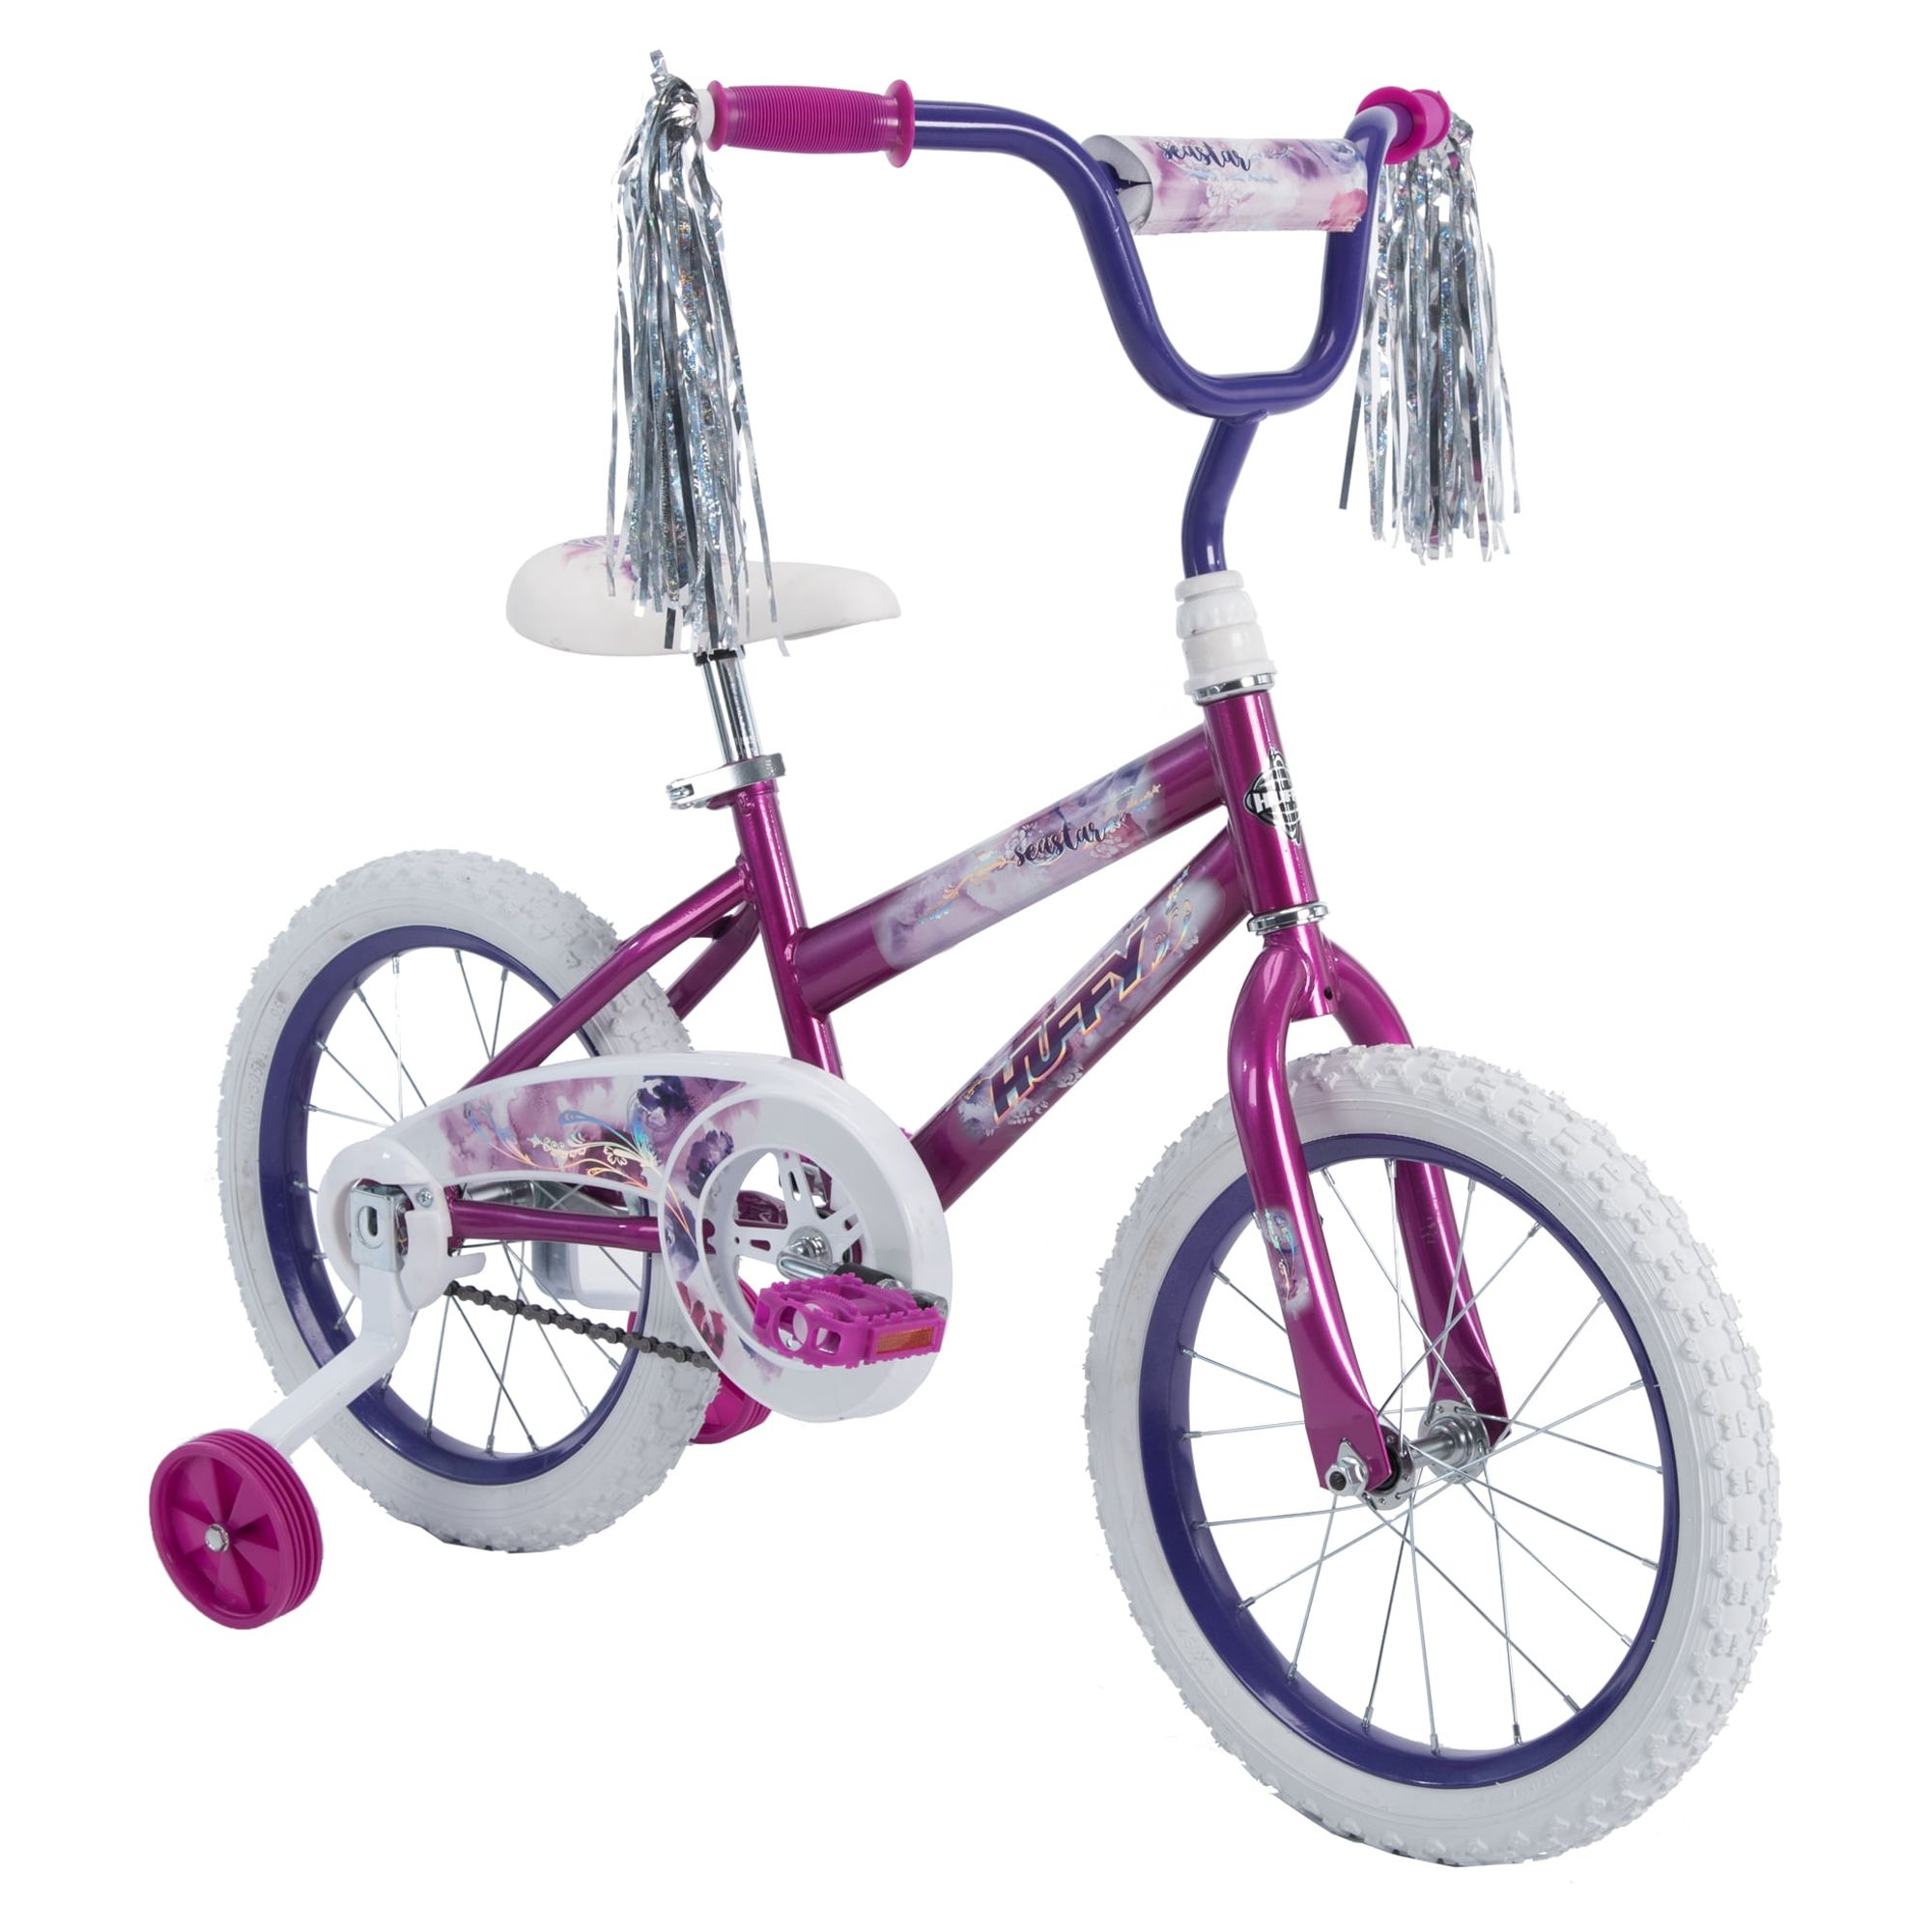 Huffy 16 in. Sea Star Kids Bike for Girls Ages 4 and up, Child, Metallic Purple - image 2 of 10